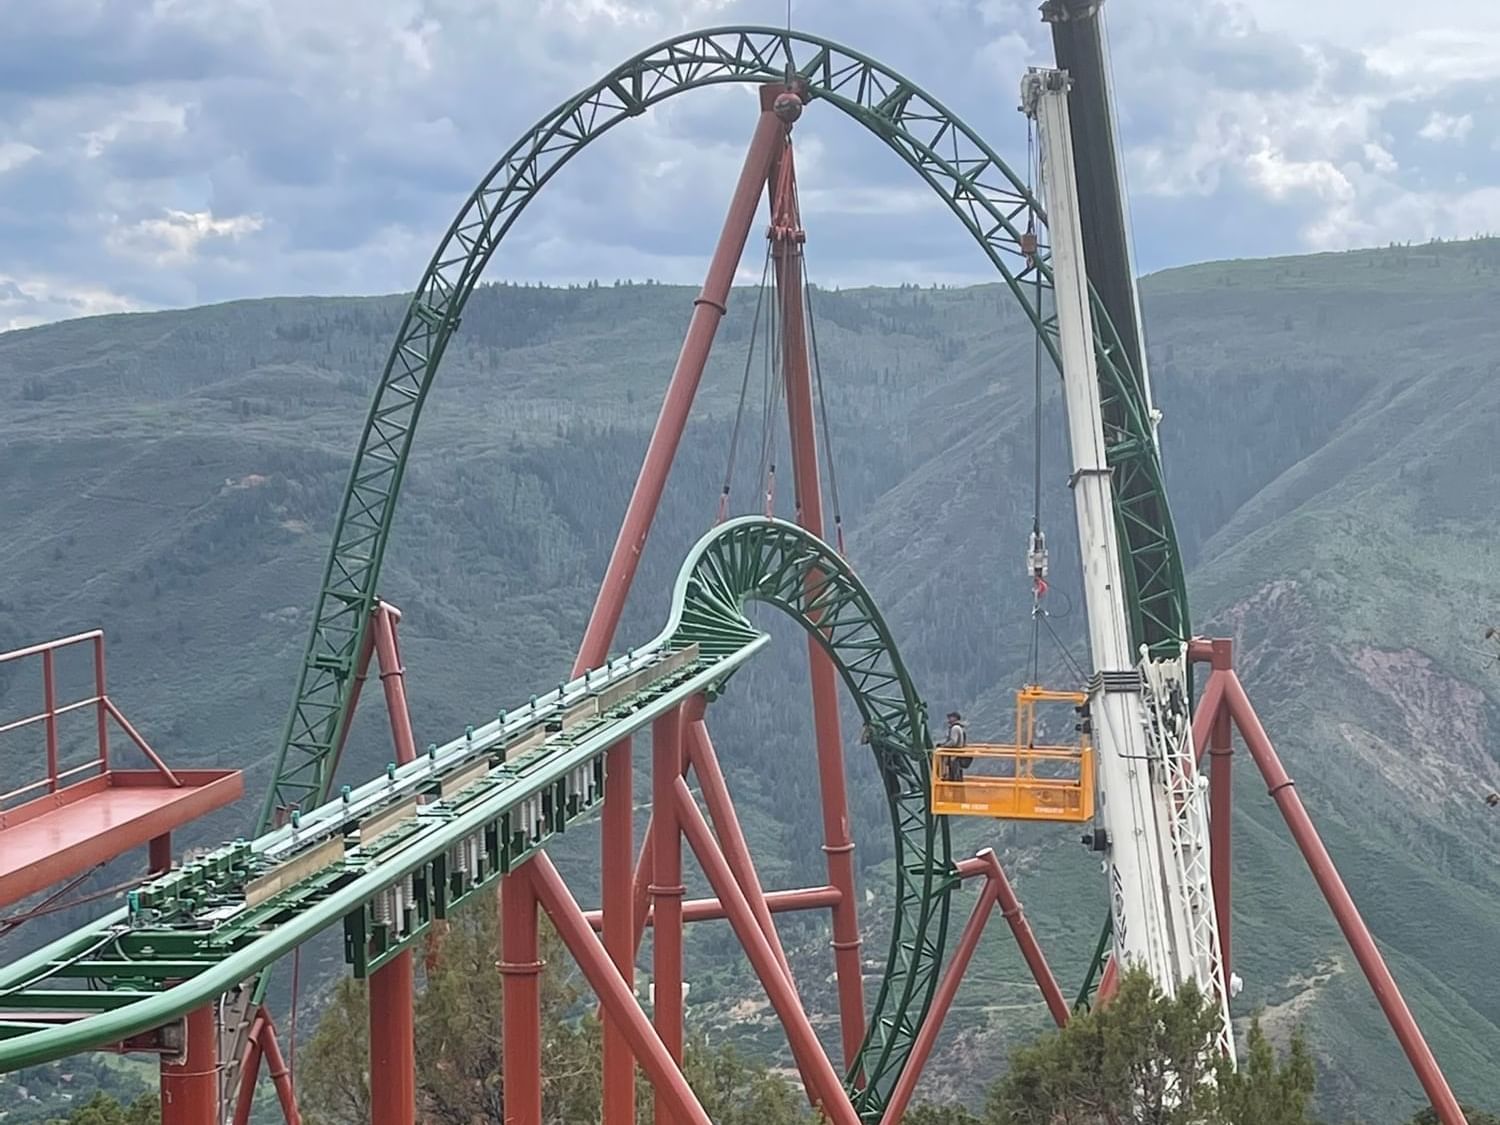 The Highest Looping Roller Coaster in the U.S. Is on Top of a